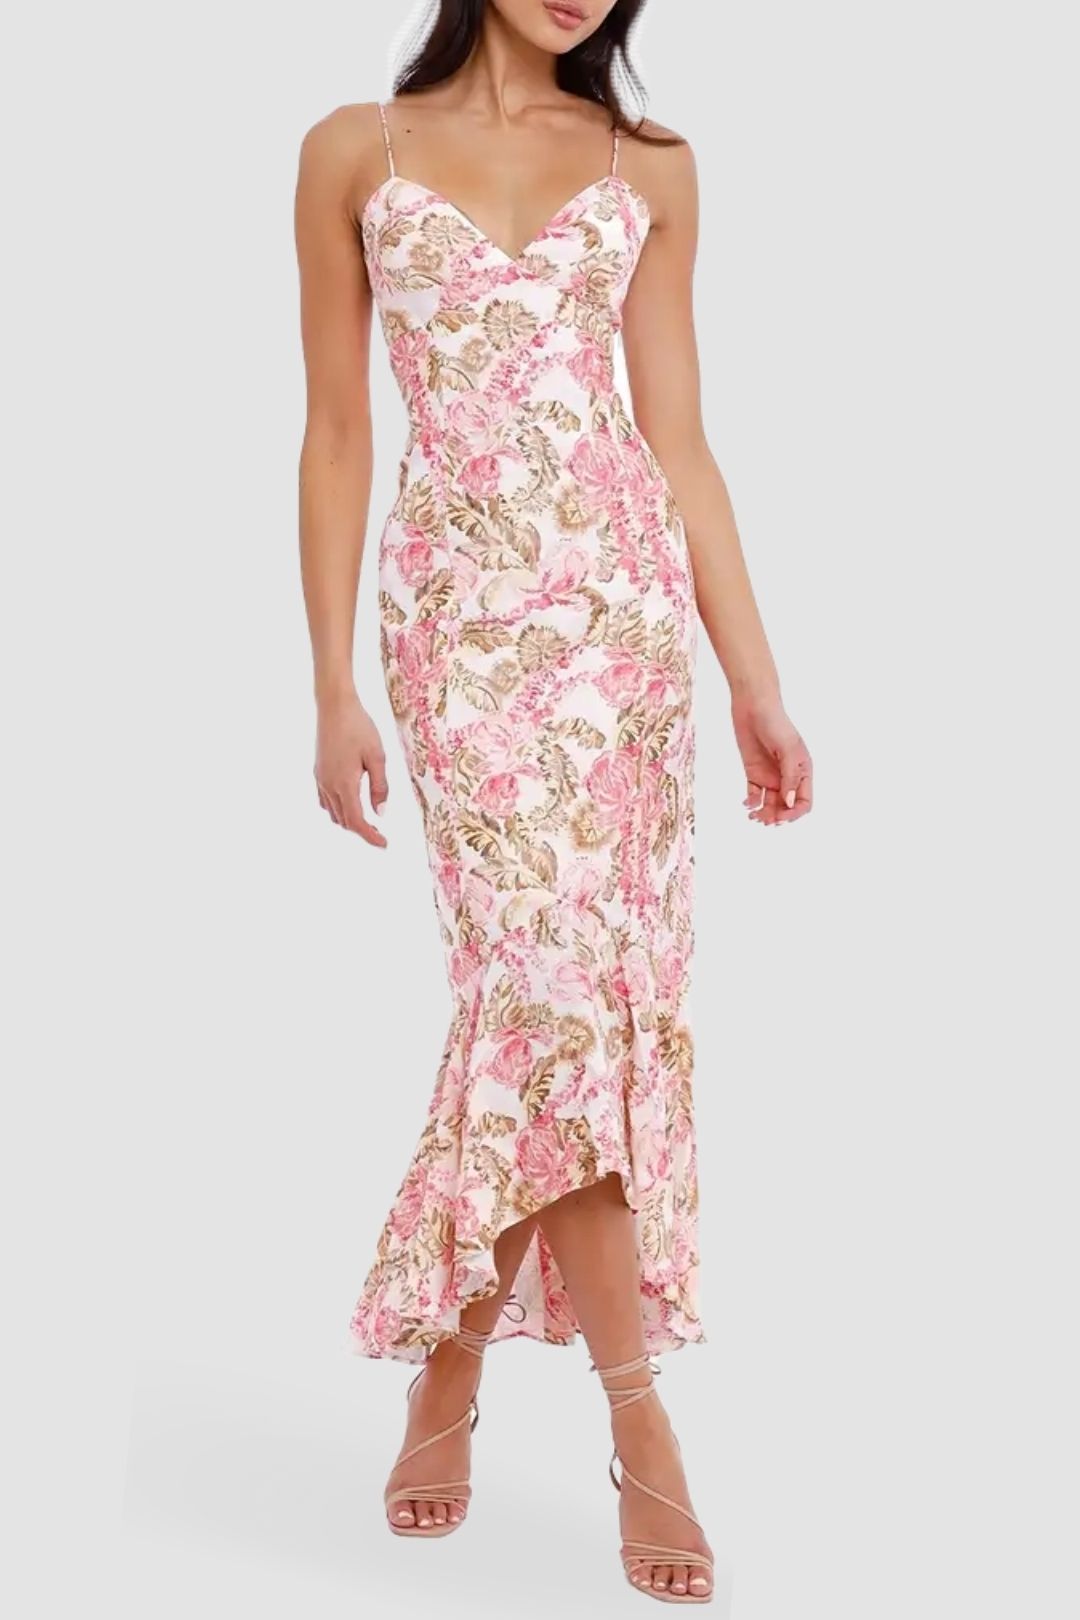 Significant Other Sangria Dress Floral pink